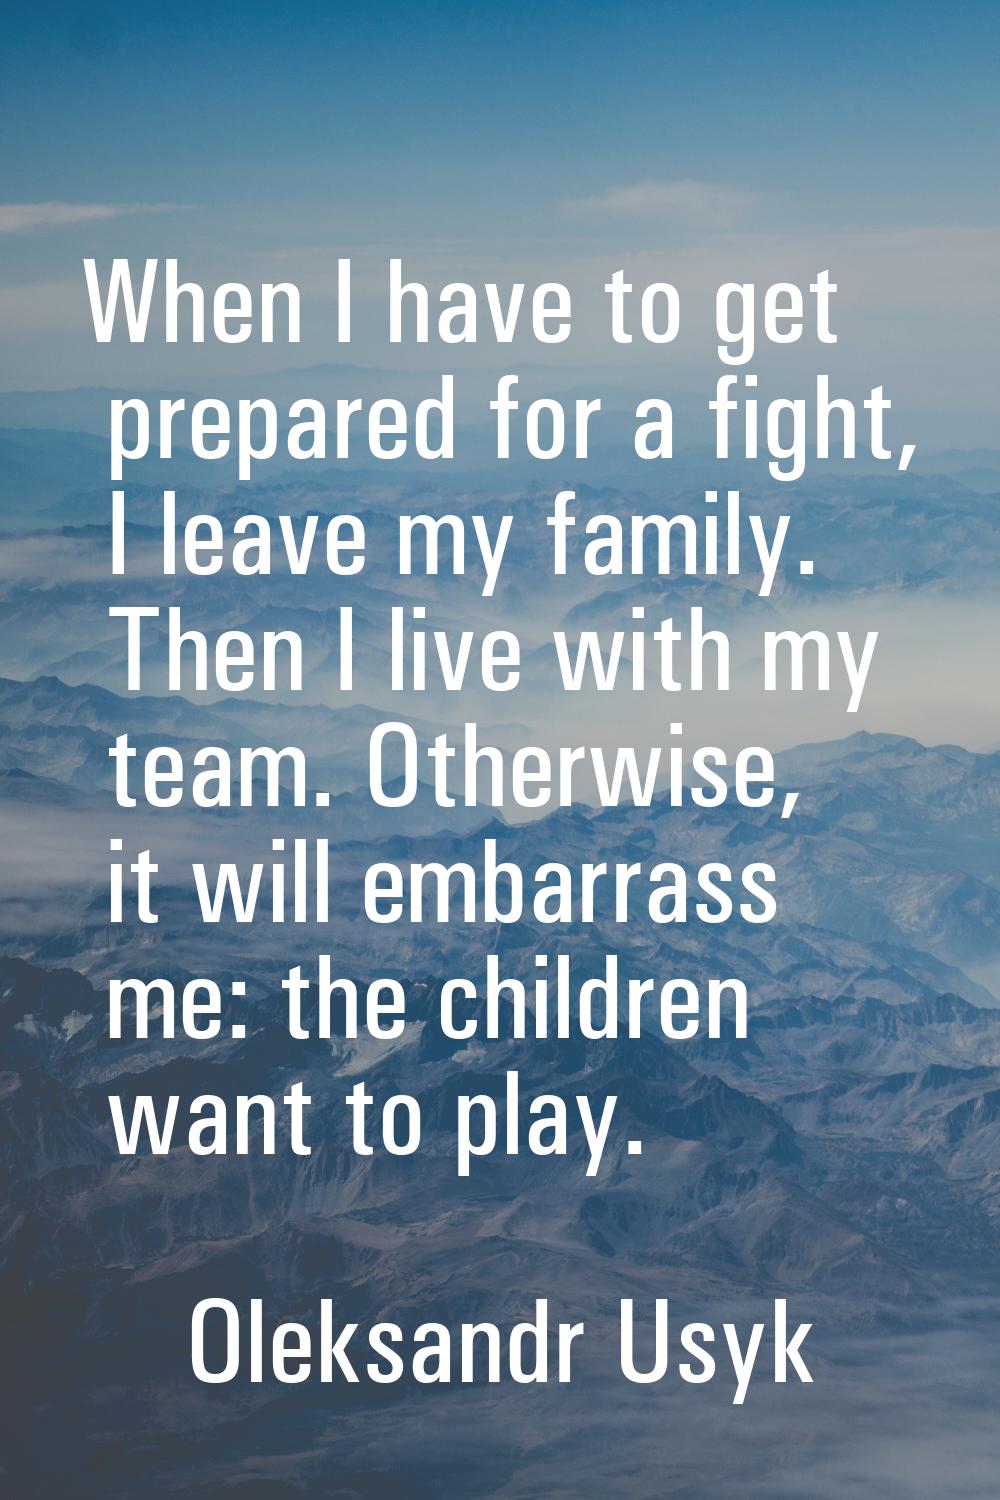 When I have to get prepared for a fight, I leave my family. Then I live with my team. Otherwise, it